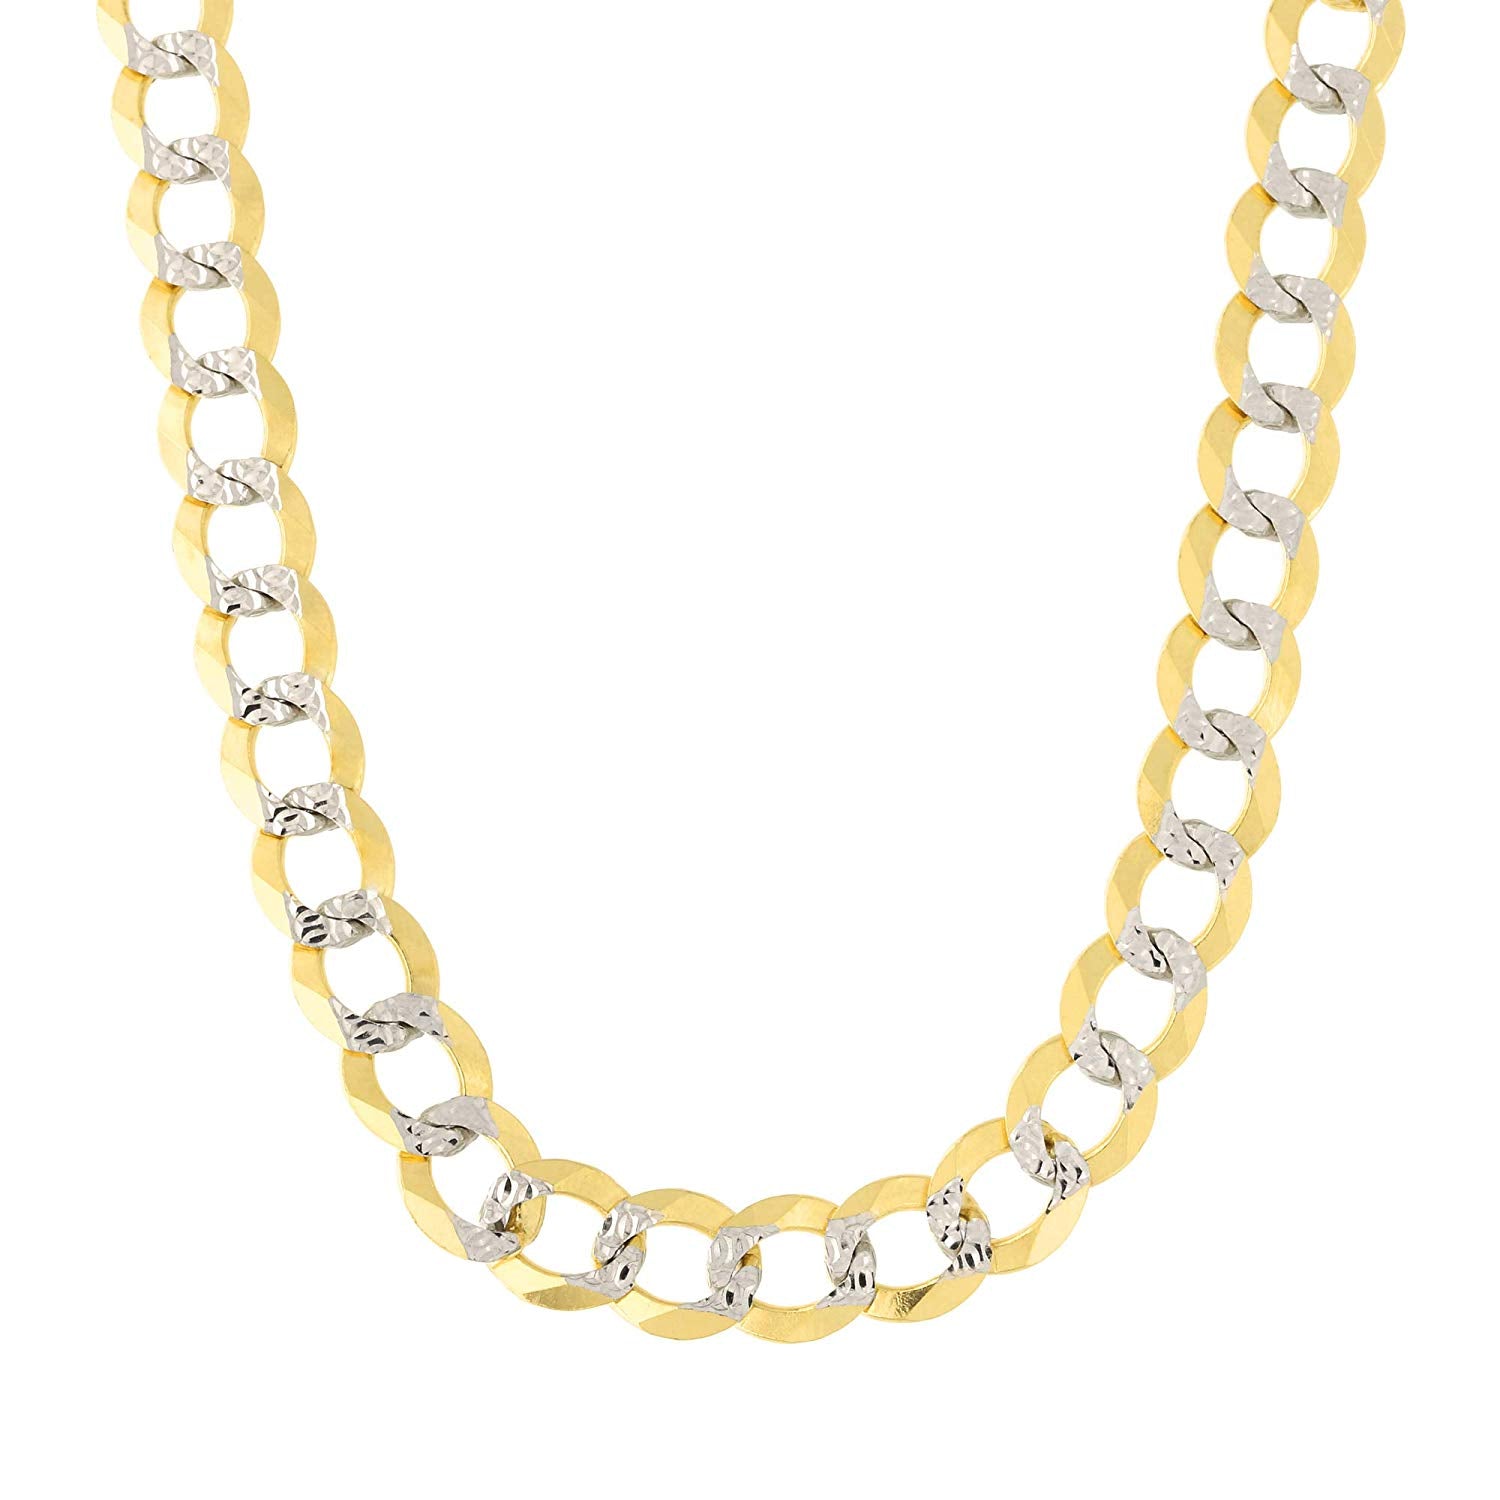 14k 2 Tone Yellow And White Gold Curb Chain Necklace, 7mm fine designer jewelry for men and women